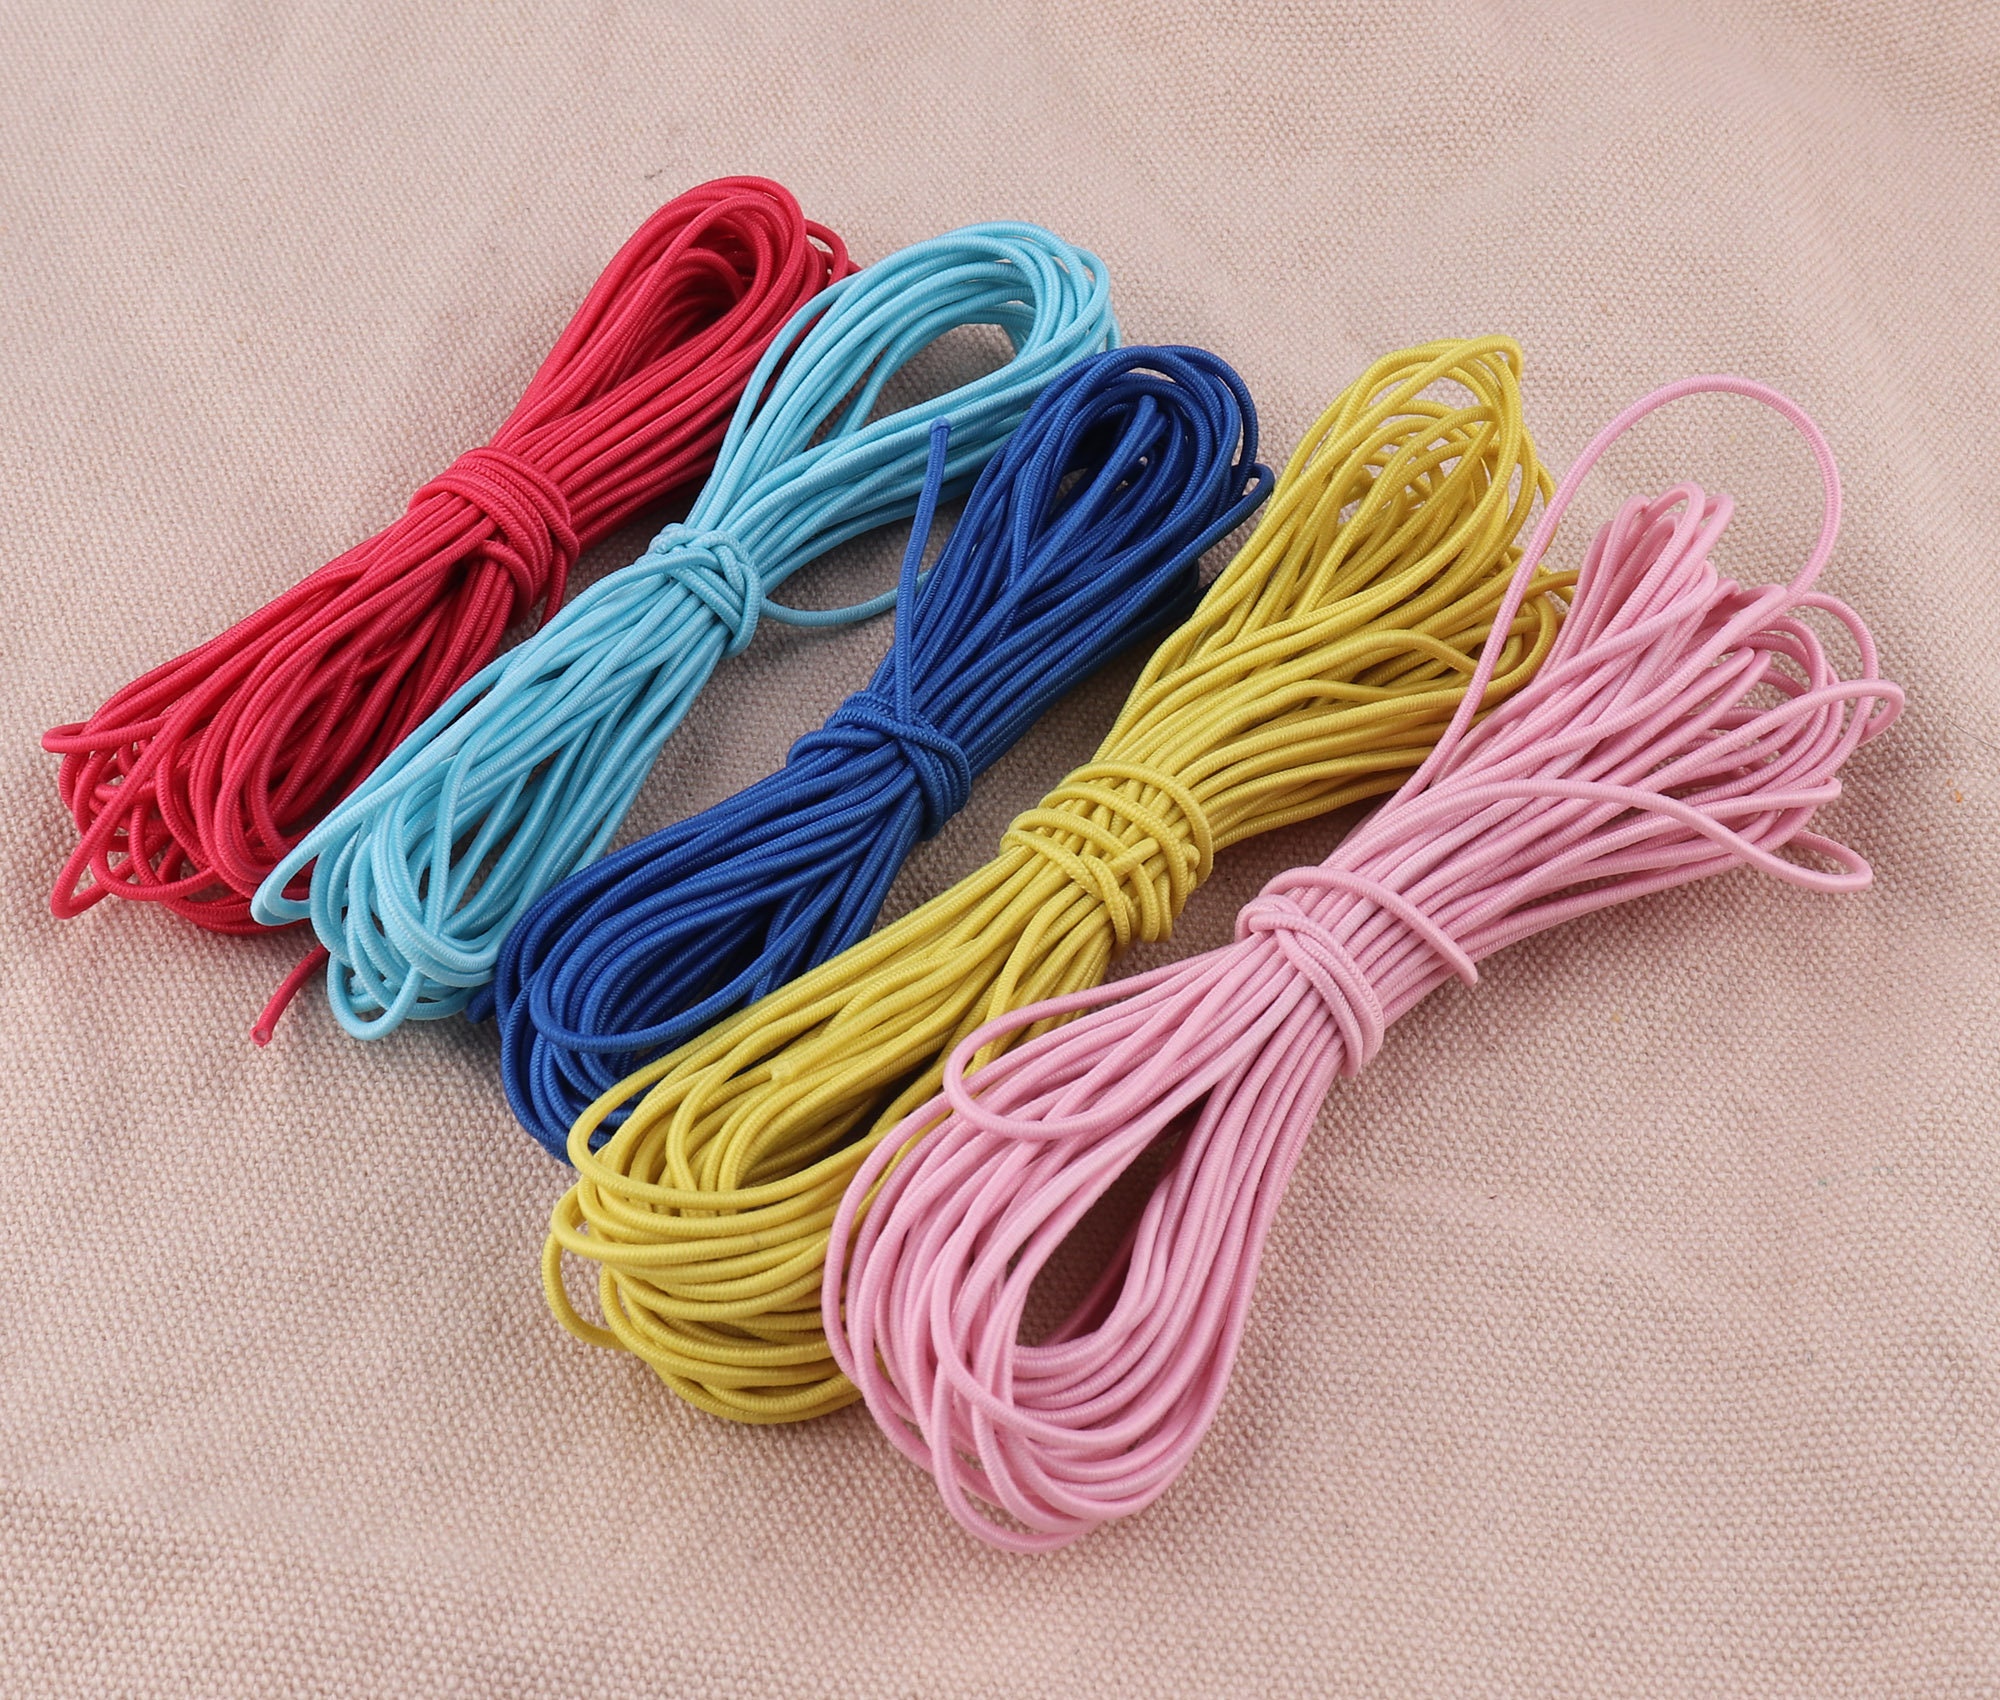 Thin Sewing 1.5mm Elastic Band Pink/blue/red/yellow Color High